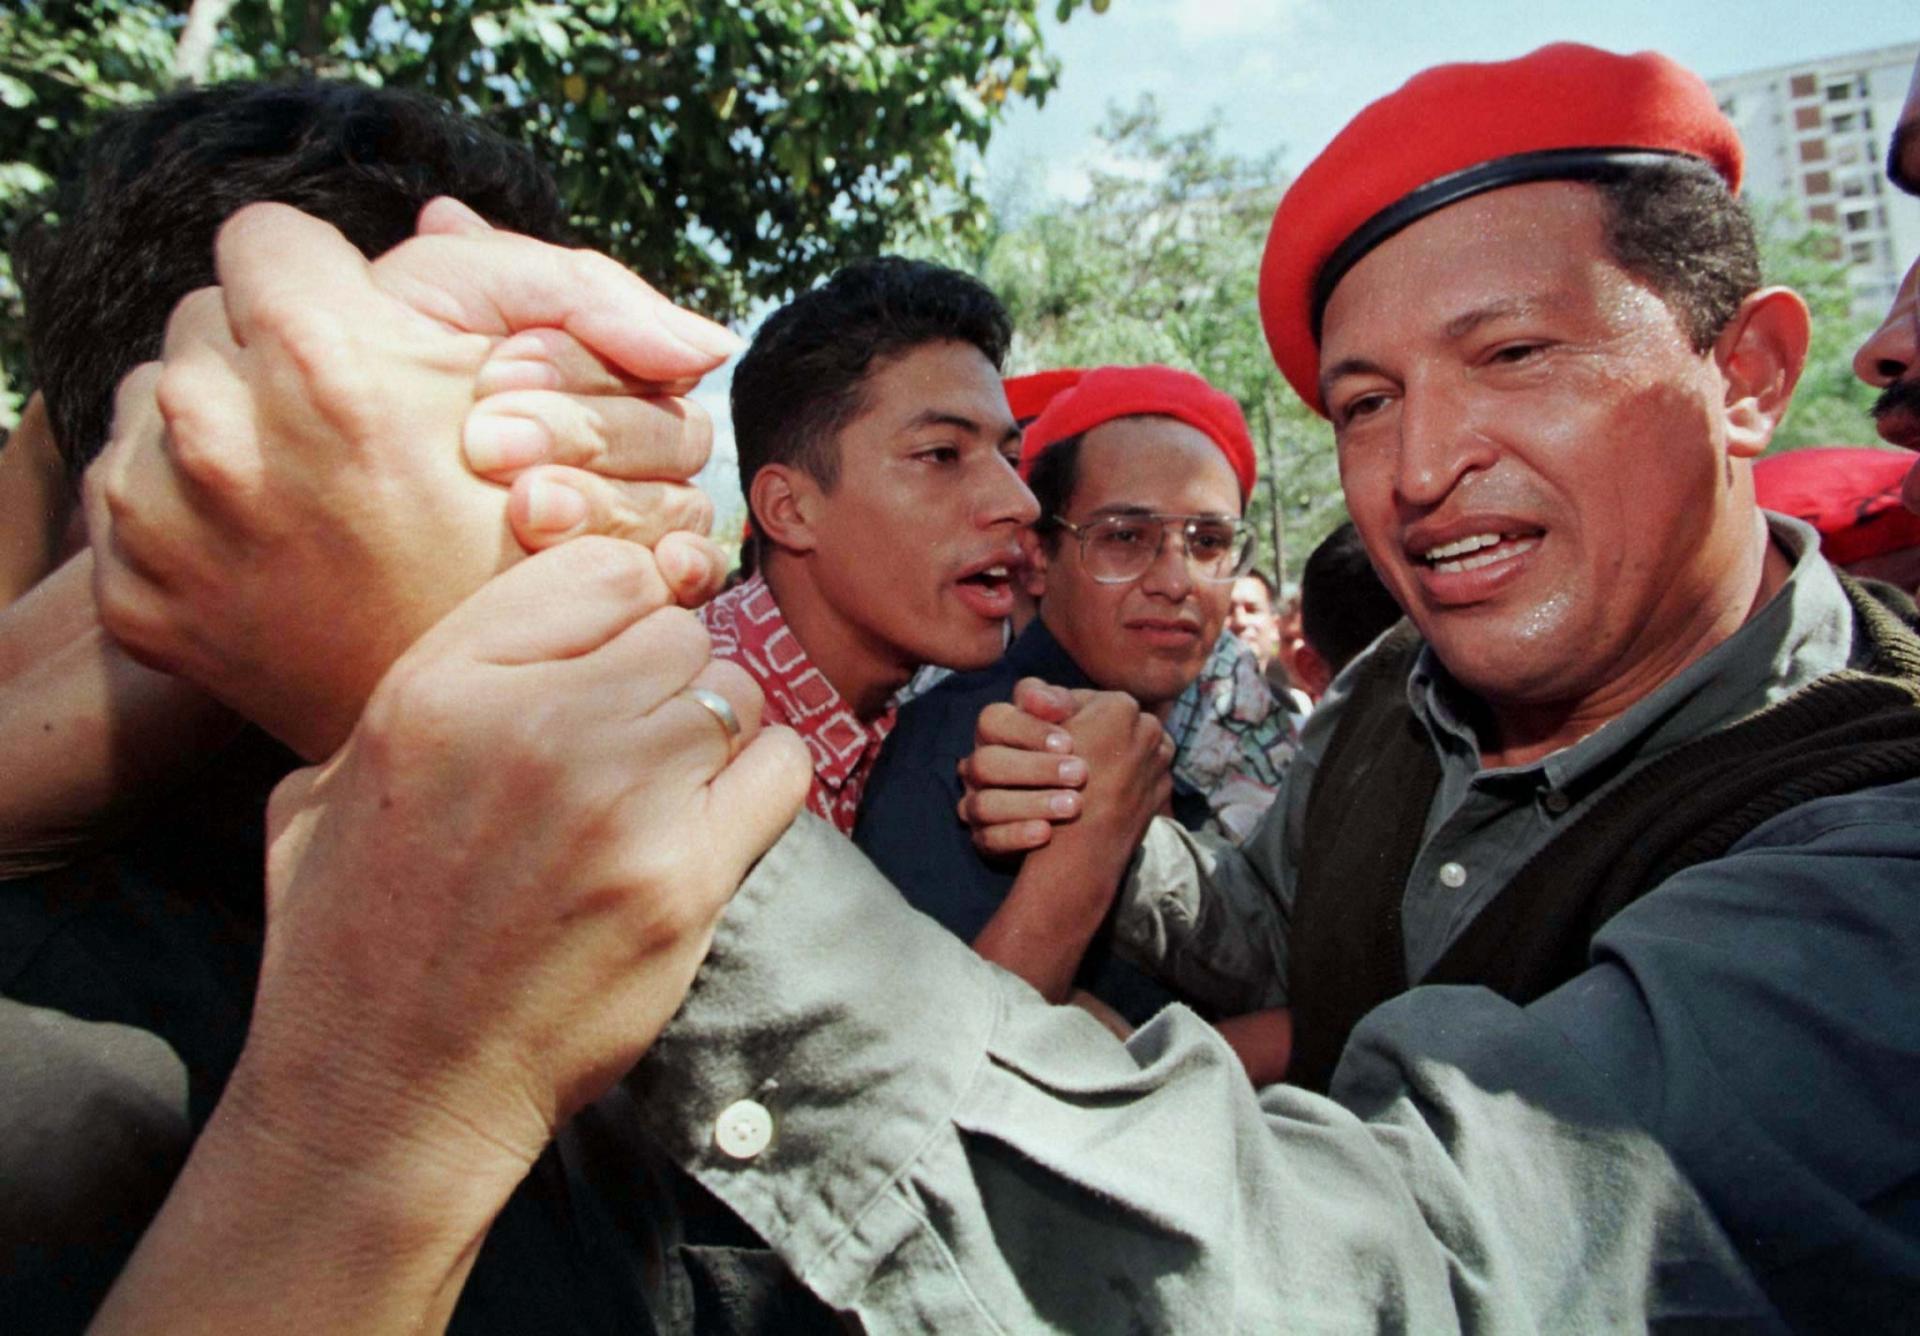 Chavez wearing red beret shakes hand of supporter